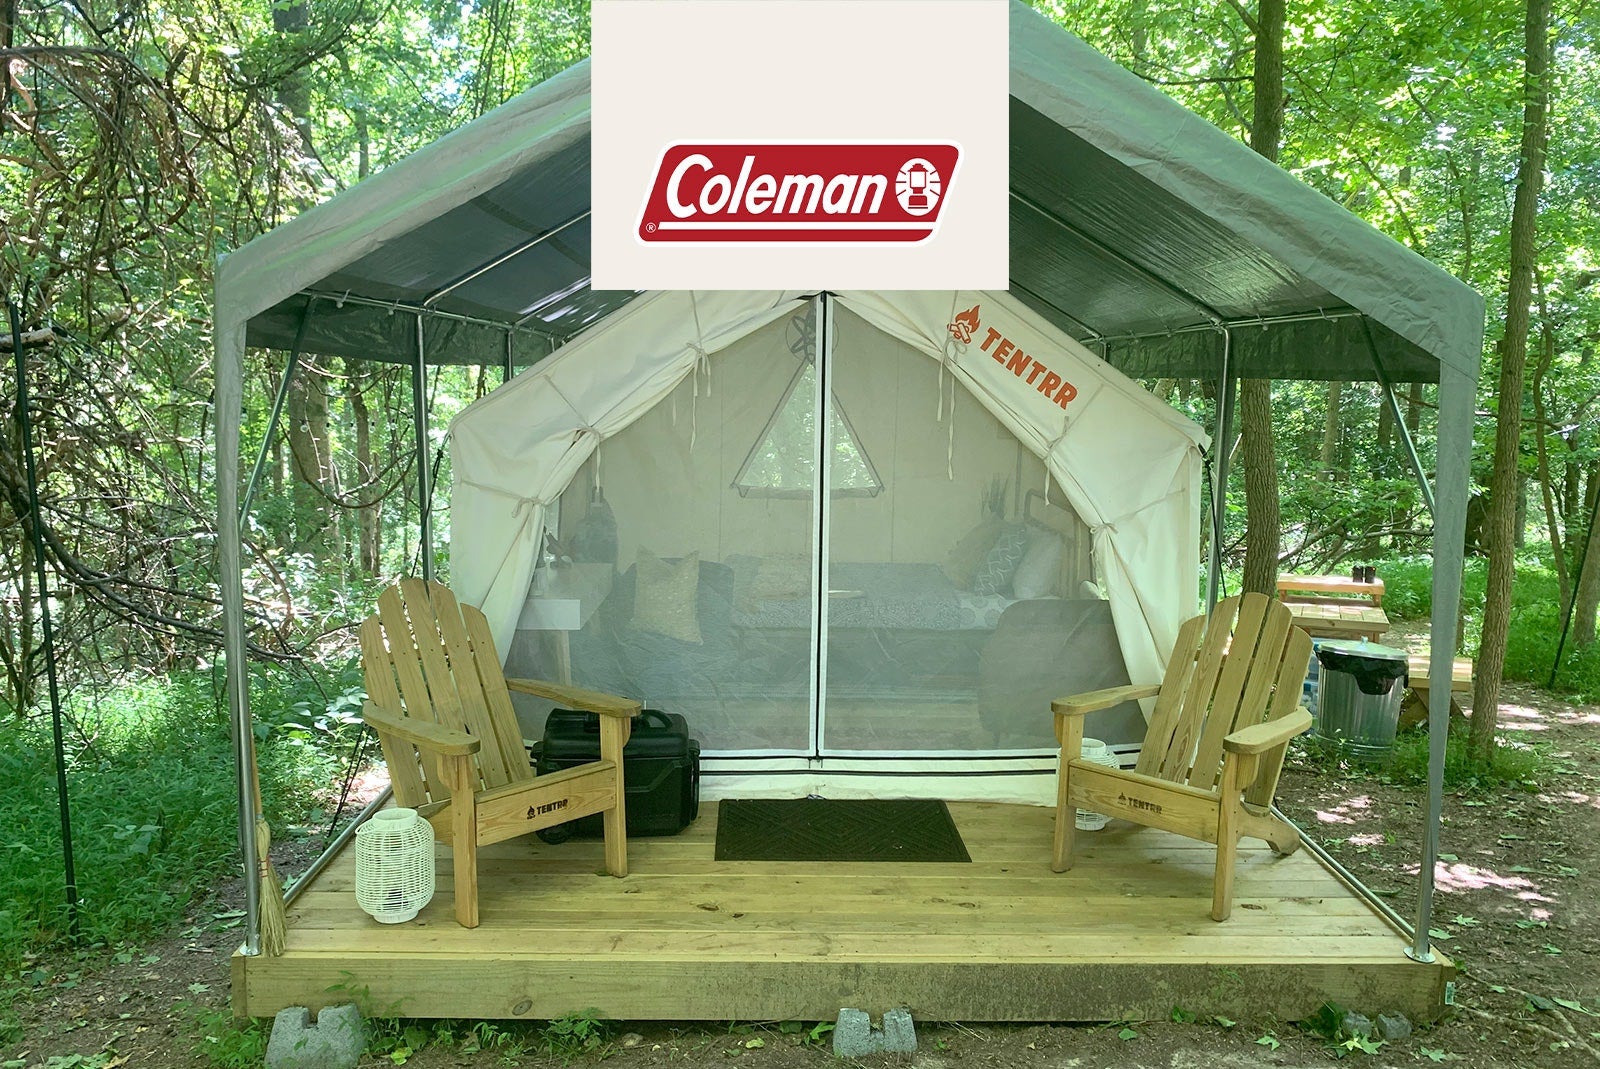 Camper submitted image from Tentrr Signature Site - Barbara's Serenity - Coleman Outfitted Site - 1